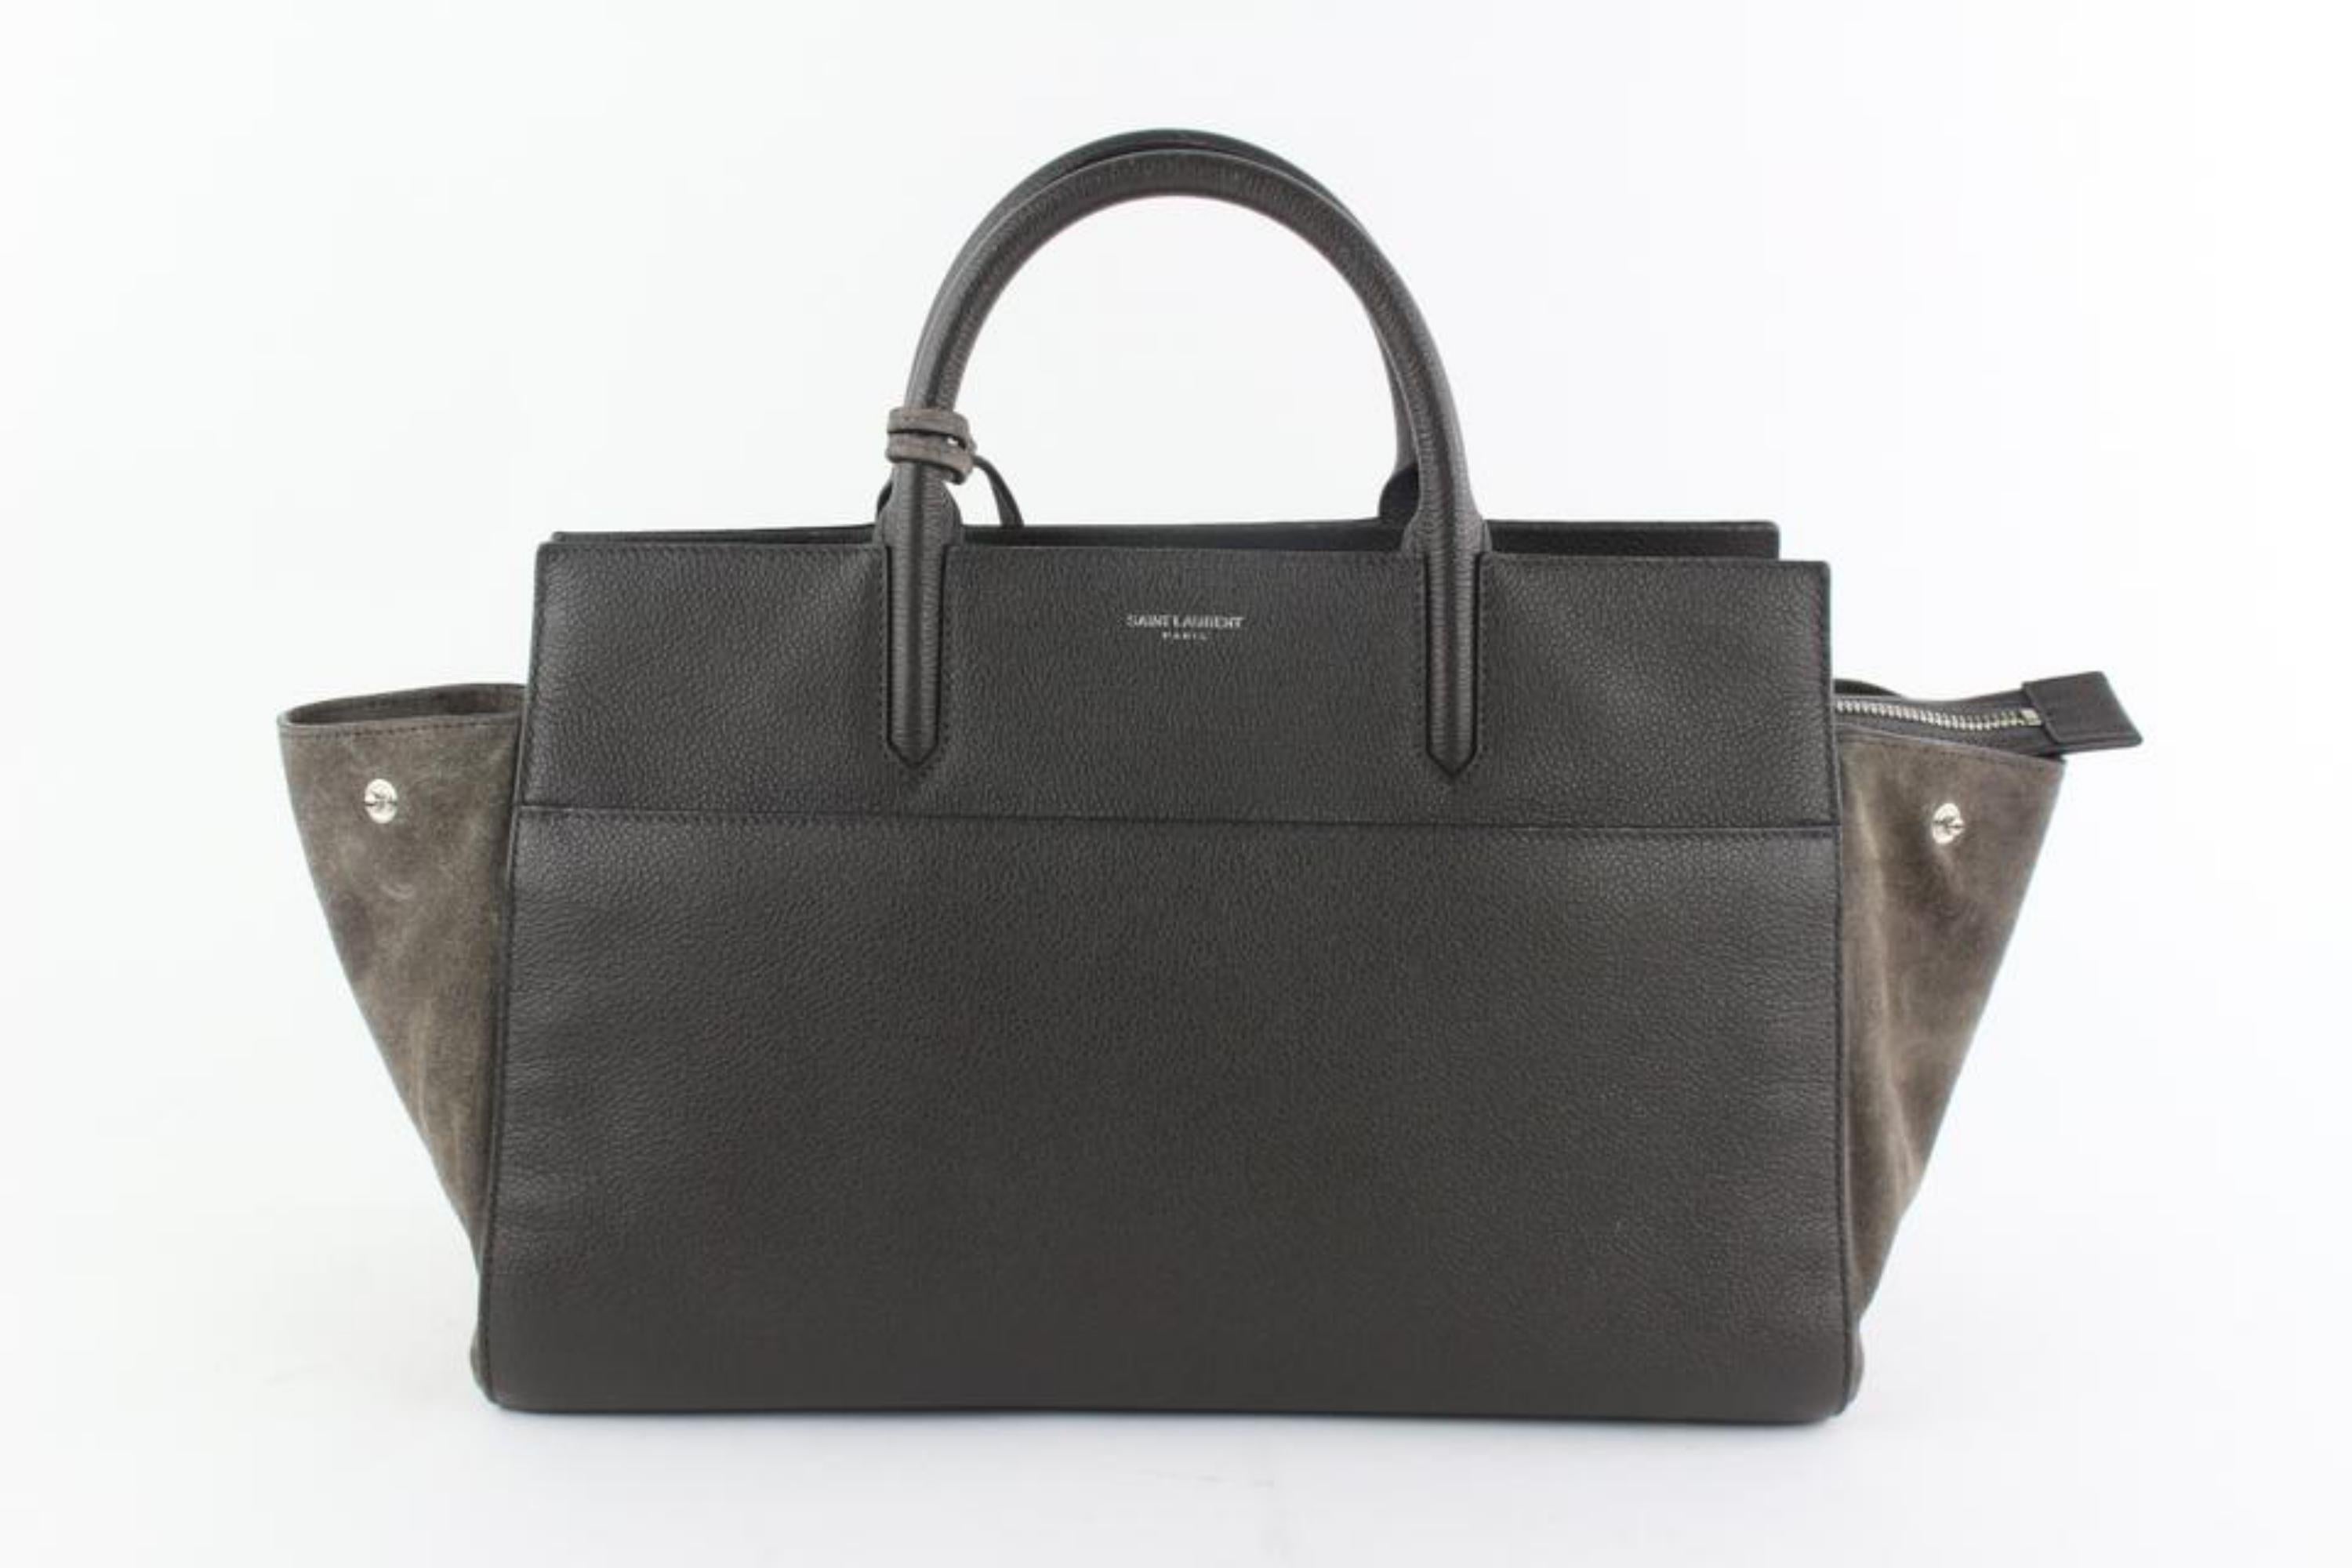 Saint Laurent Cabas Rive Gauche Anthracite Small 2way 16mz1019 Grey Leather Tote For Sale 1